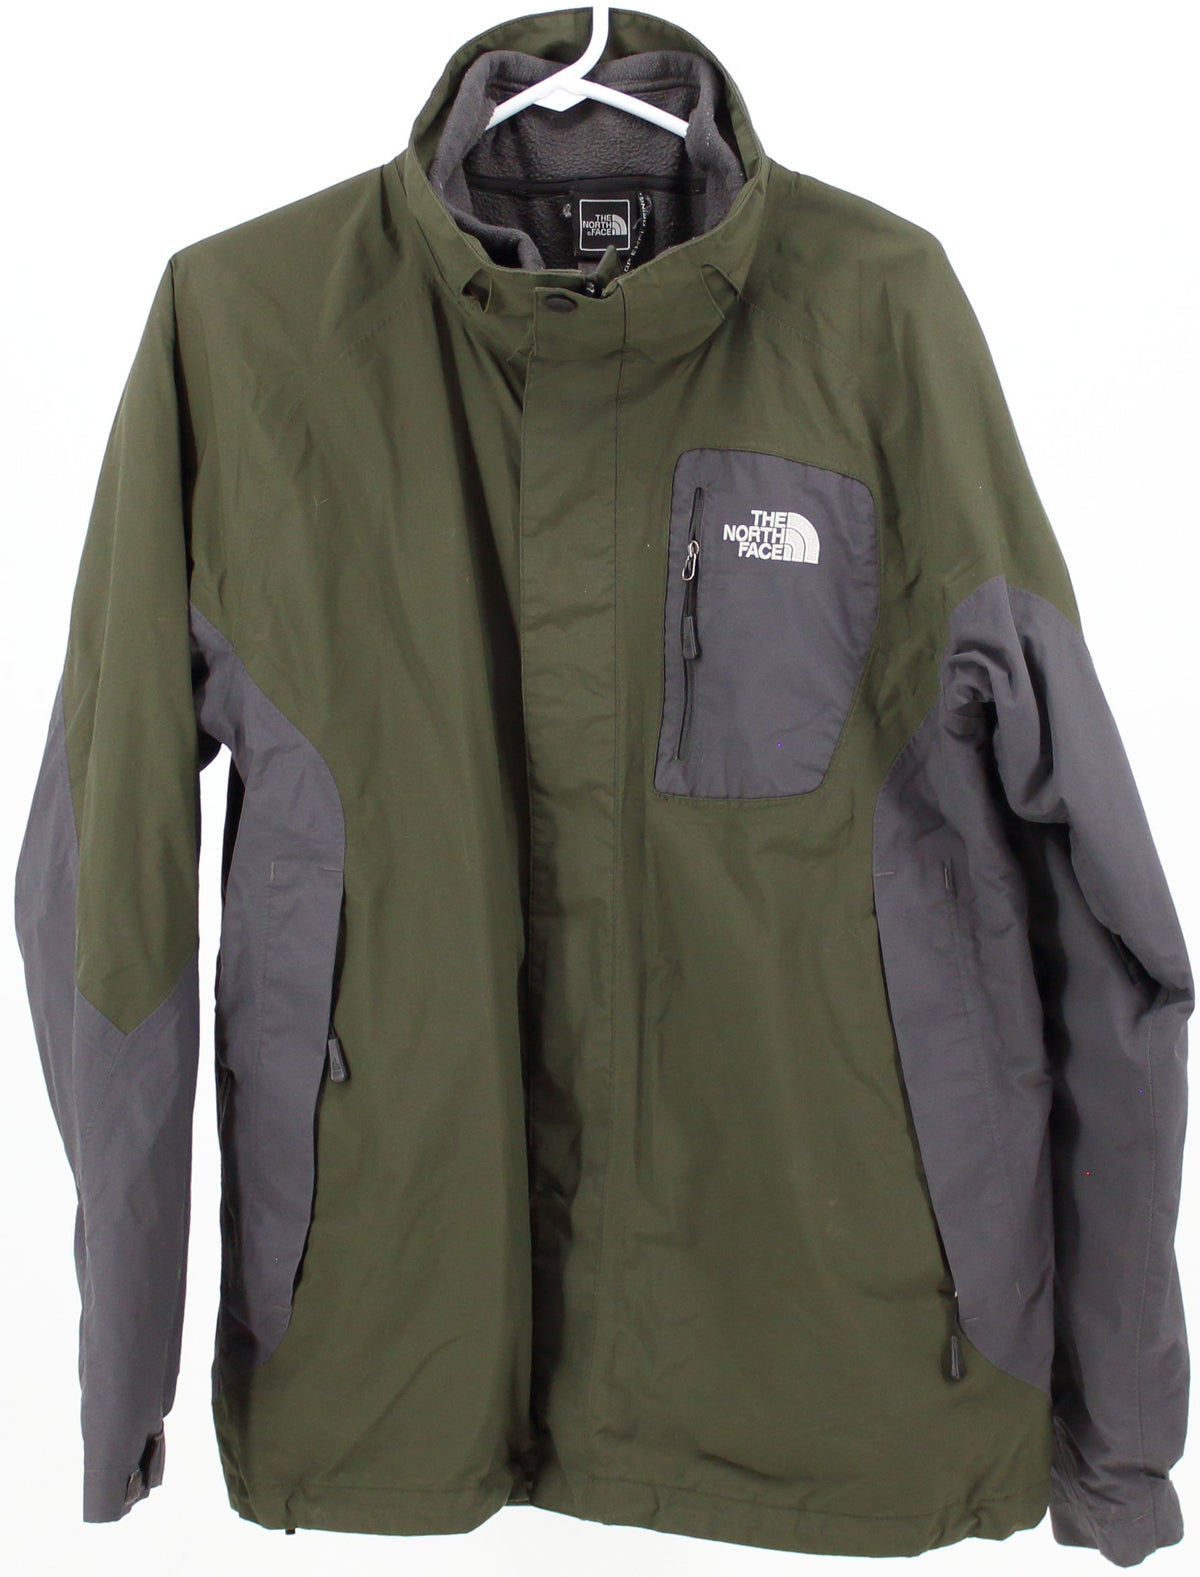 The North Face Military Green and Grey Nylon Jacket with Removable Fleece Lining